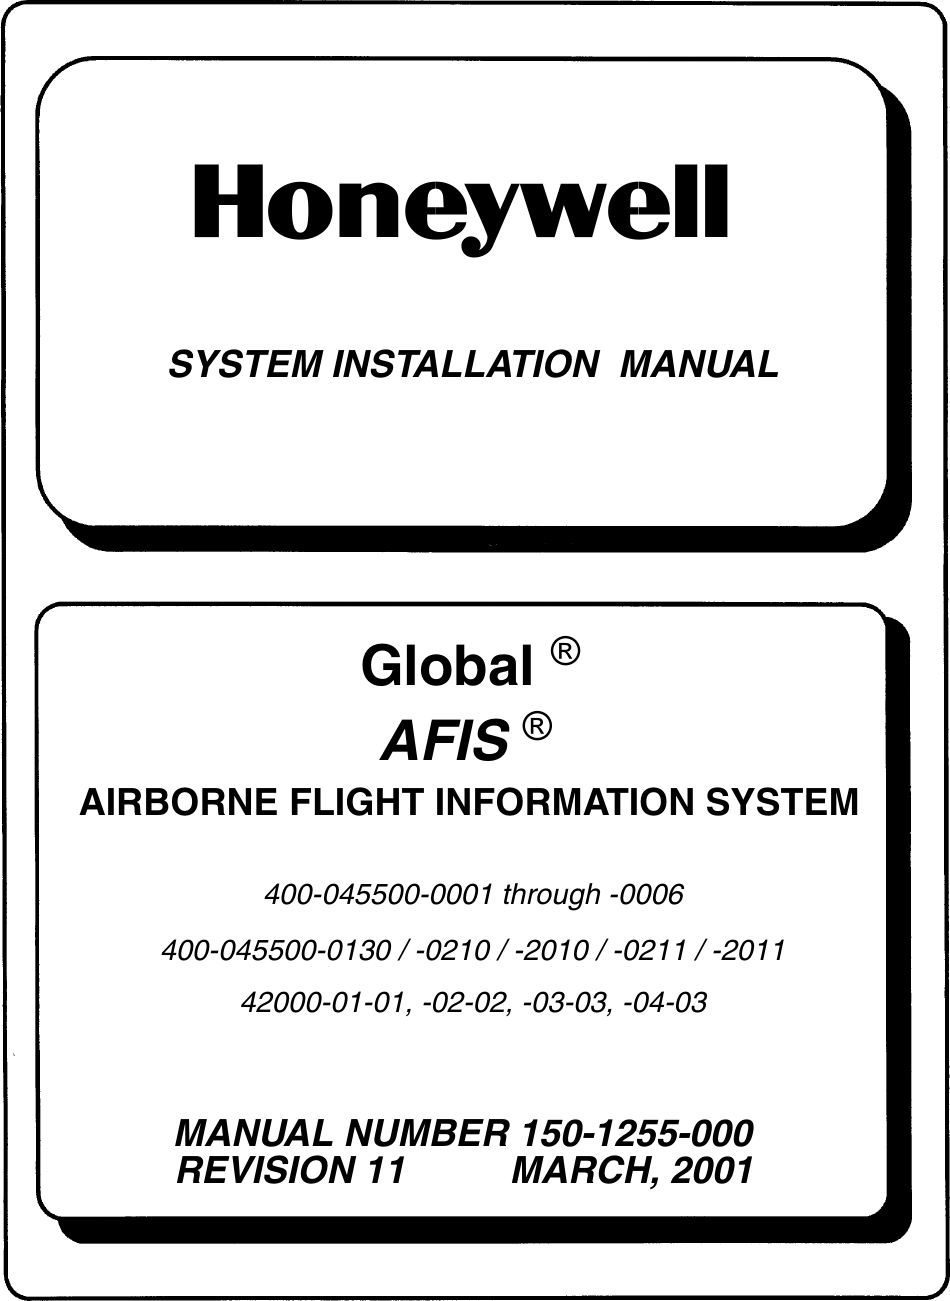 SYSTEM INSTALLATION  MANUALAIRBORNE FLIGHT INFORMATION SYSTEMMANUAL NUMBER 150-1255-000REVISION 11          MARCH, 2001nGlobal ®AFIS ®400-045500-0001 through -0006400-045500-0130 / -0210 / -2010 / -0211 / -201142000-01-01, -02-02, -03-03, -04-03